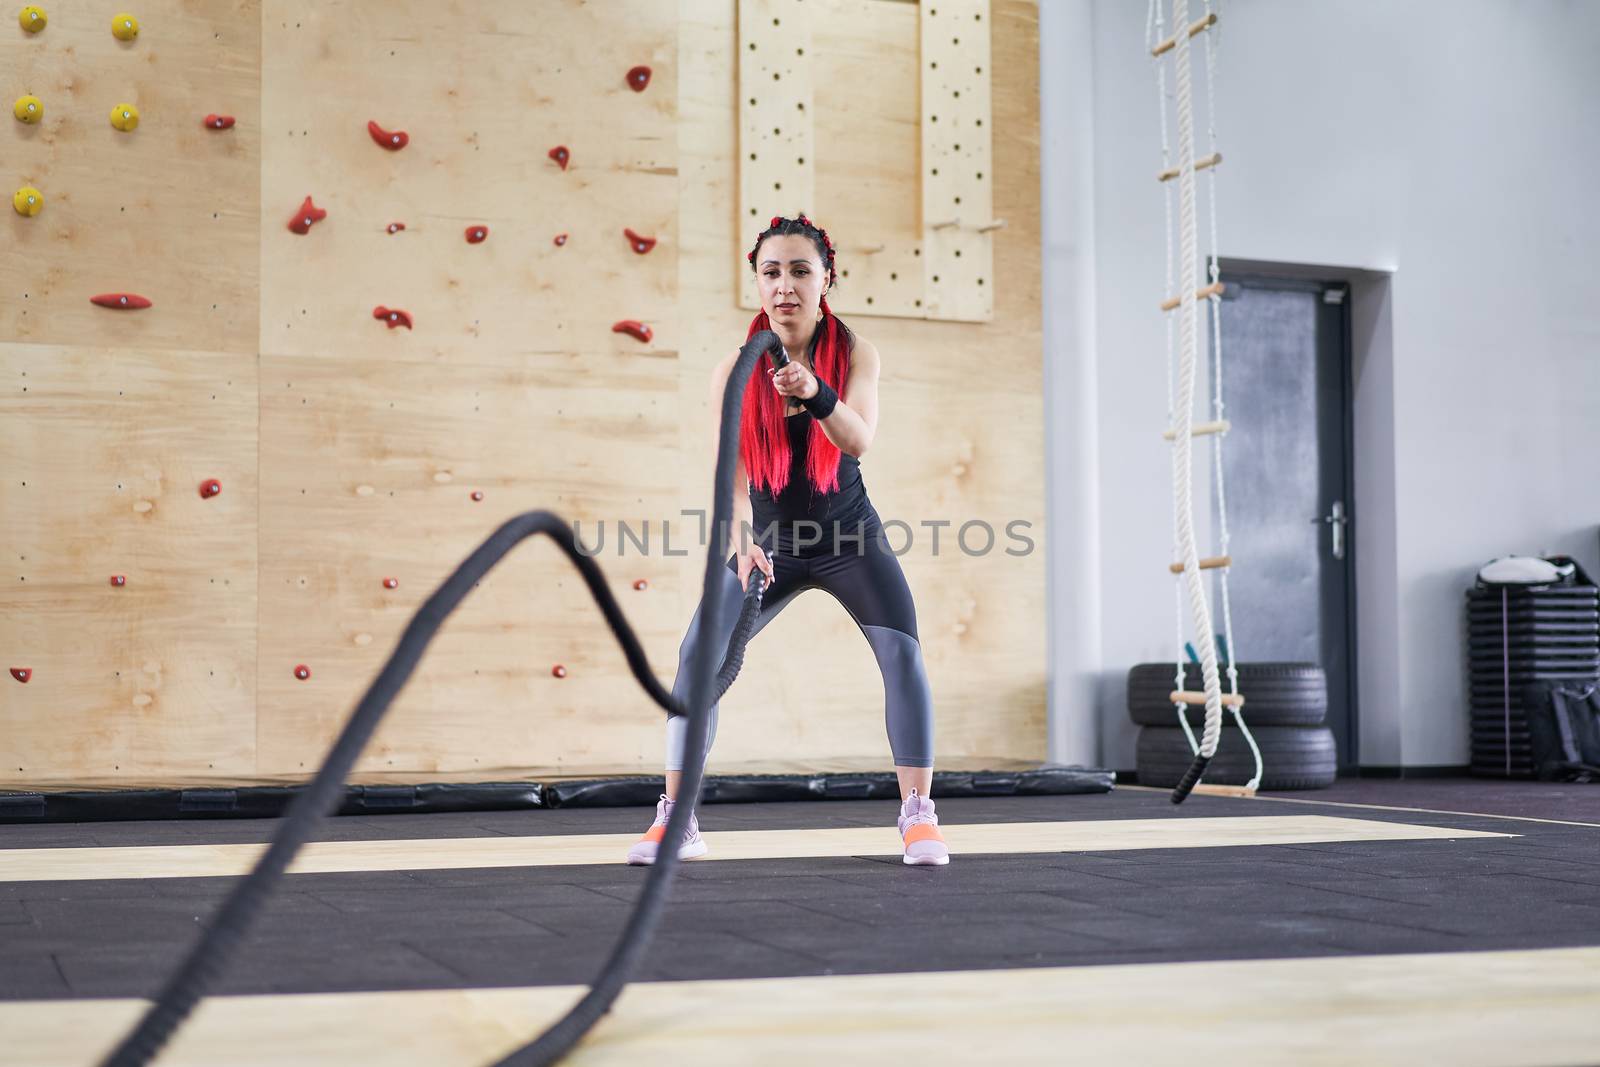 Gym battle rope woman stamina training Athlete guy fitness exercising endurance indoor workout. Handsome caucasian sportive guy doing exercise functional training fitness. Muscular men naked torso